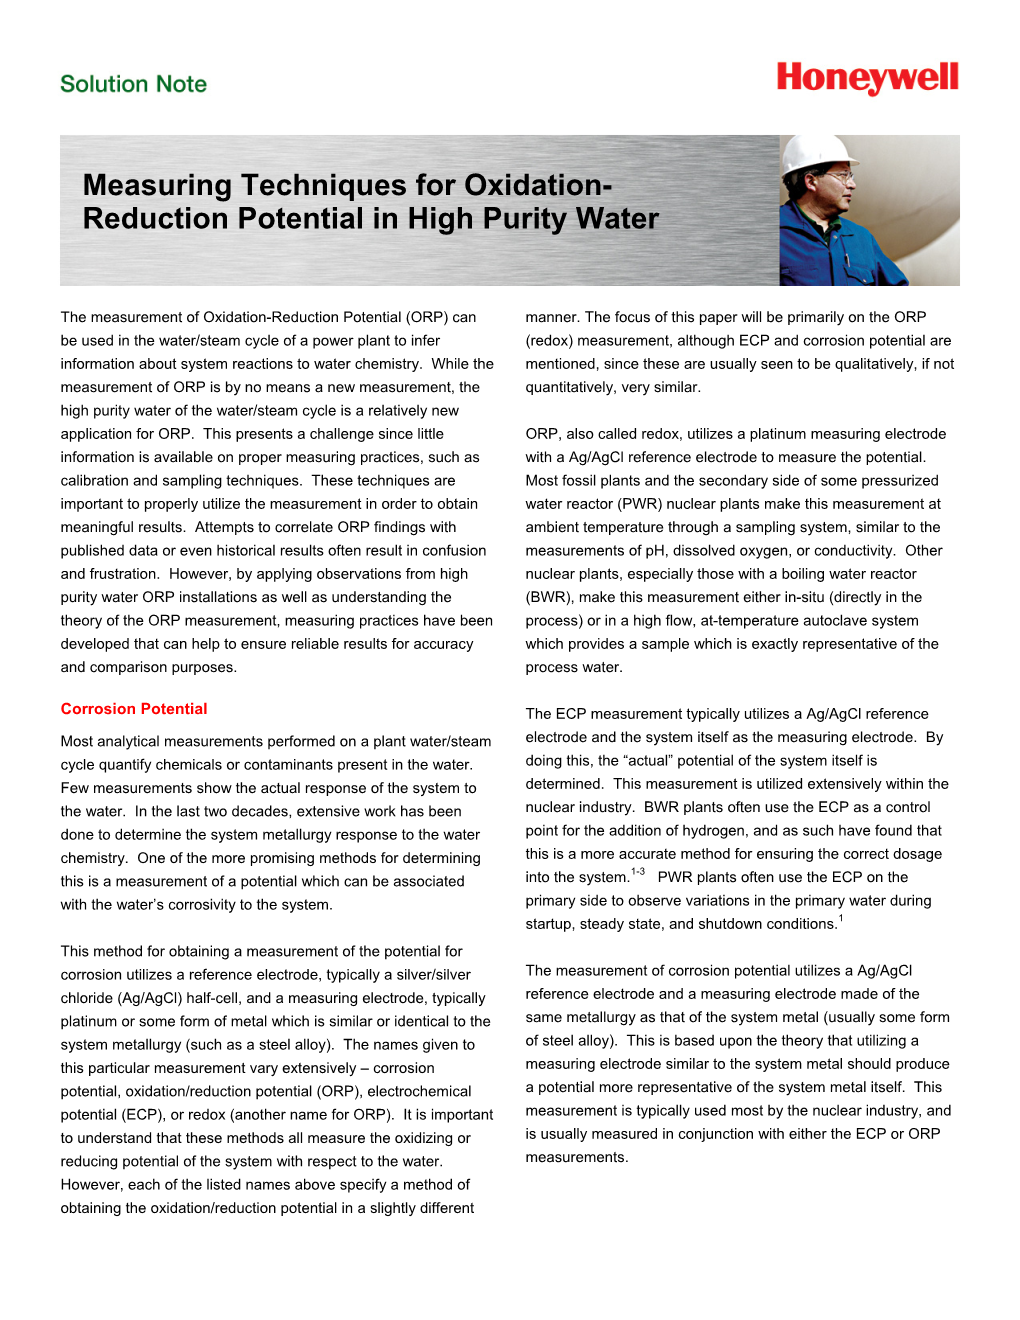 Measuring Techniques for Oxidation- Reduction Potential in High Purity Water